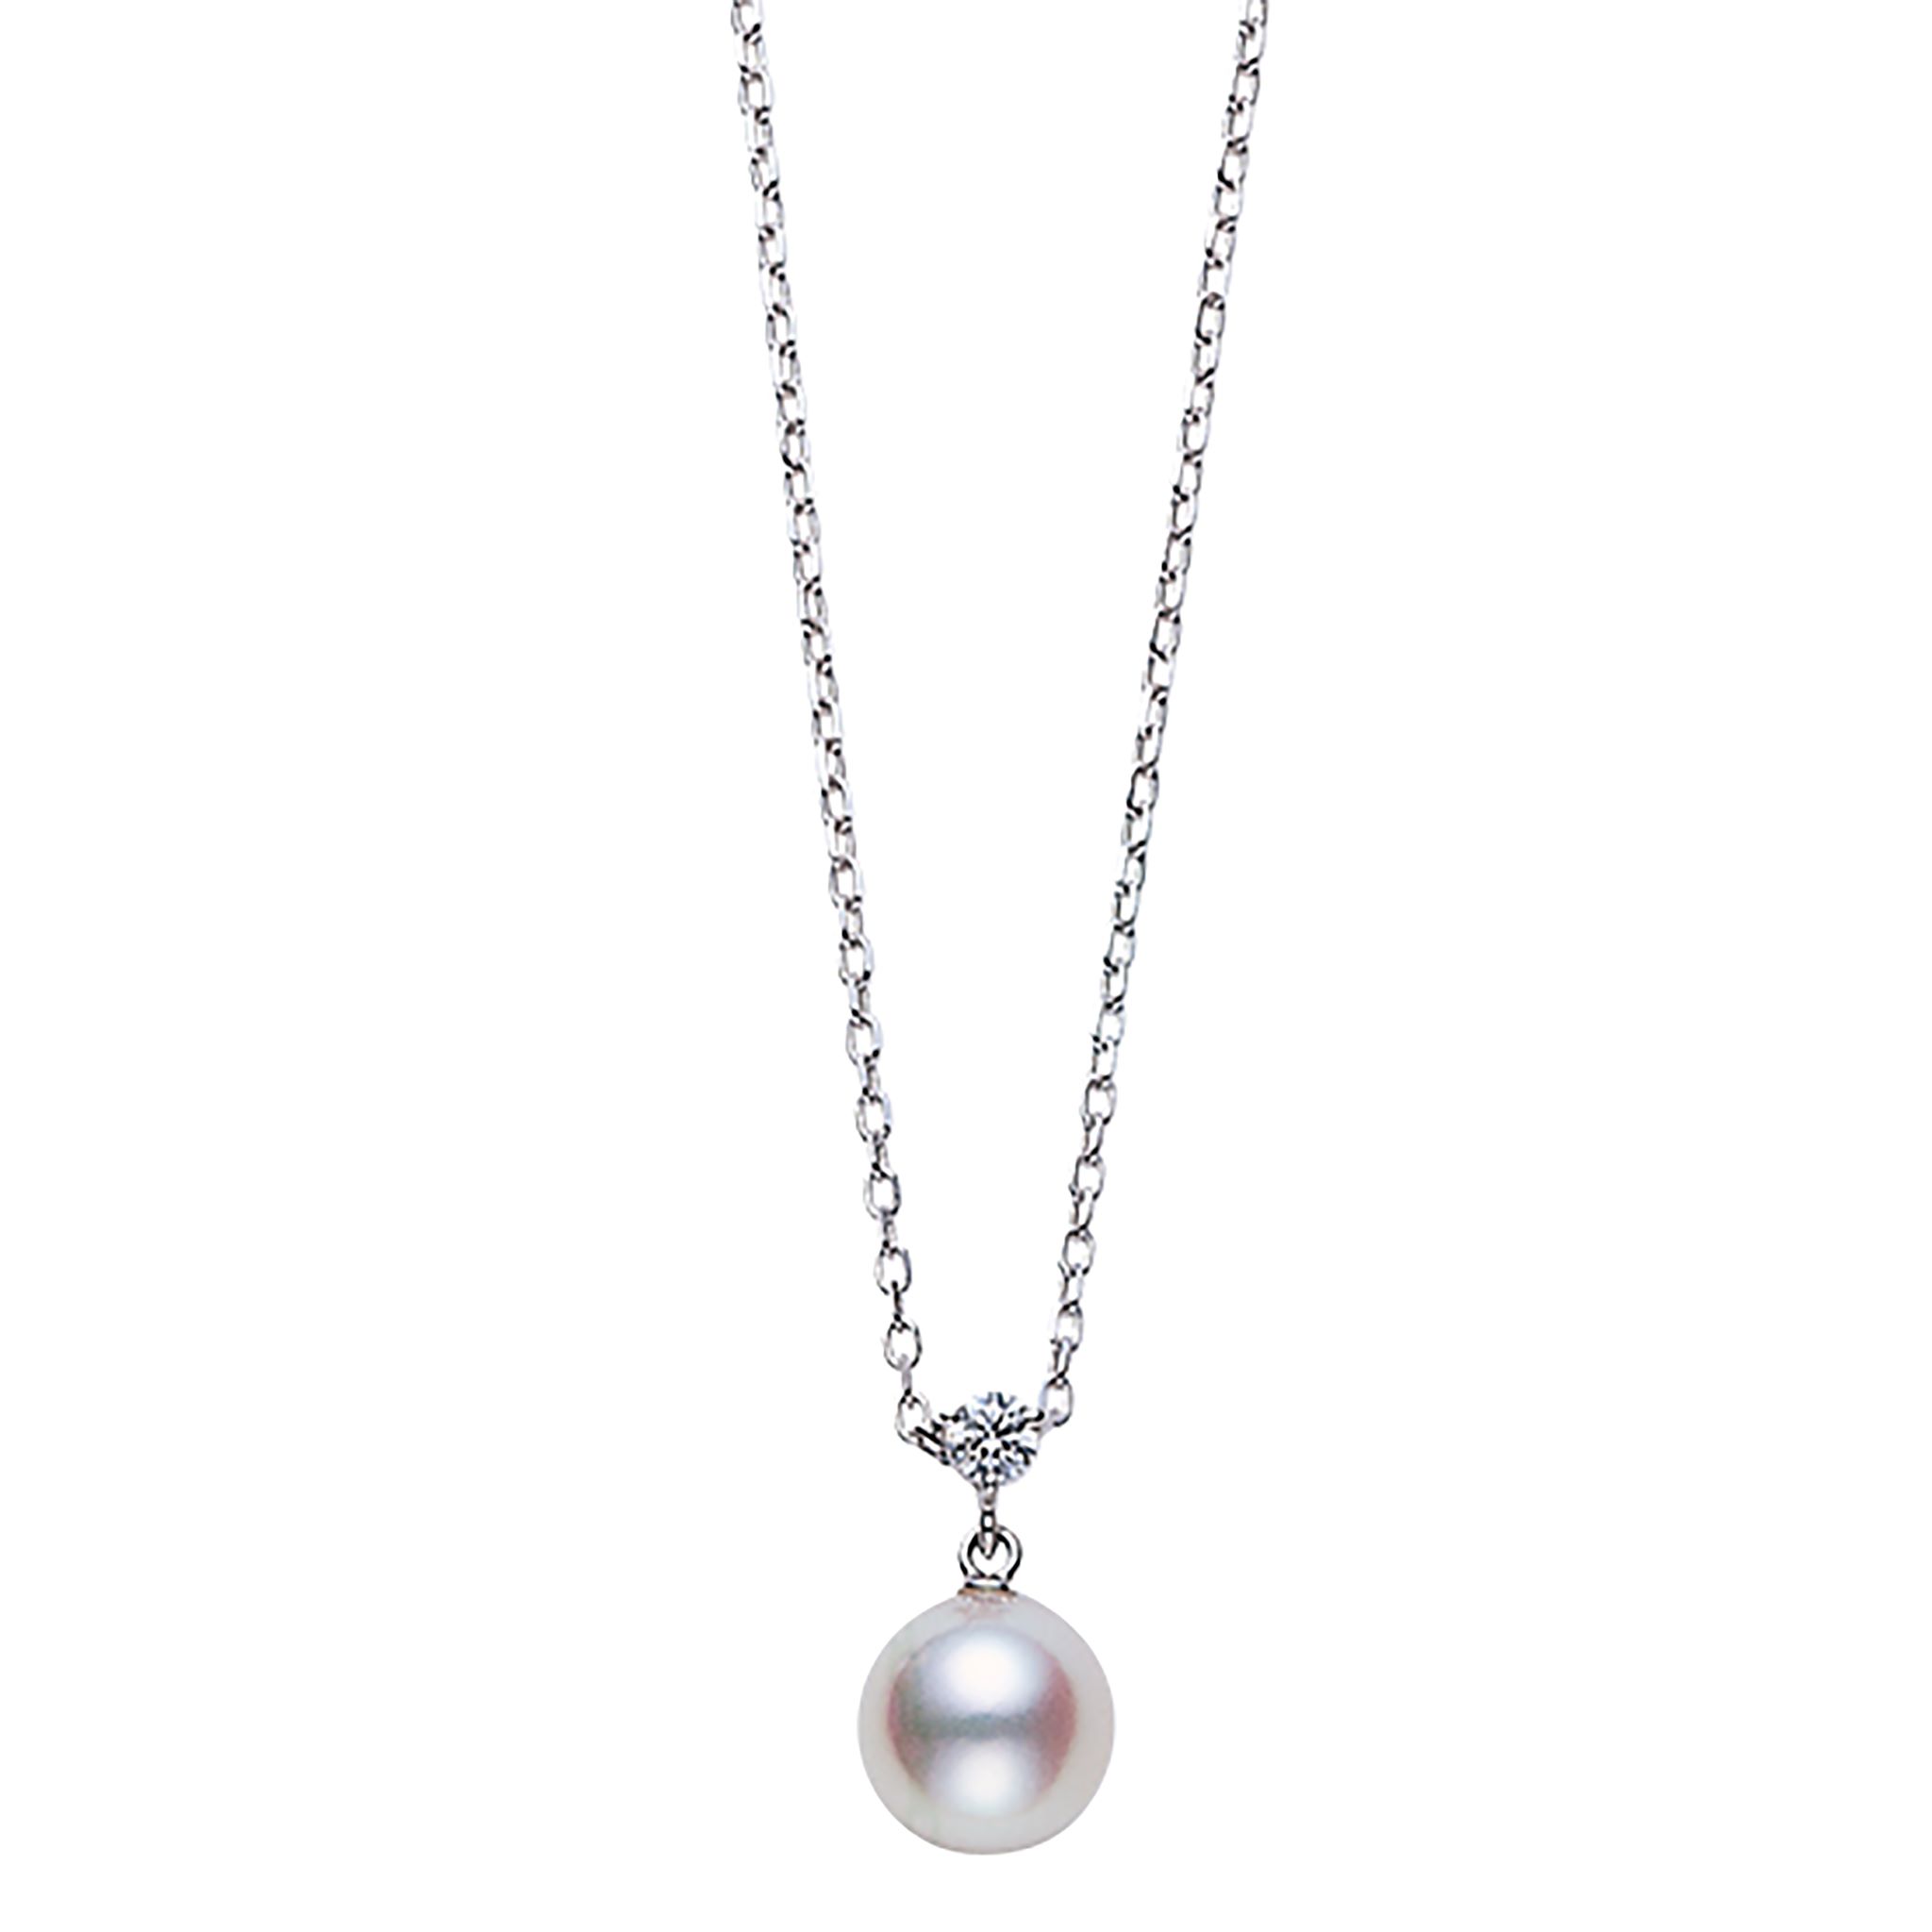 This pearl and diamond necklace by Mikimoto is crafted from 18k white gold and features an 8.25mm Akoya pearl and 0.08 total carats of diamonds.